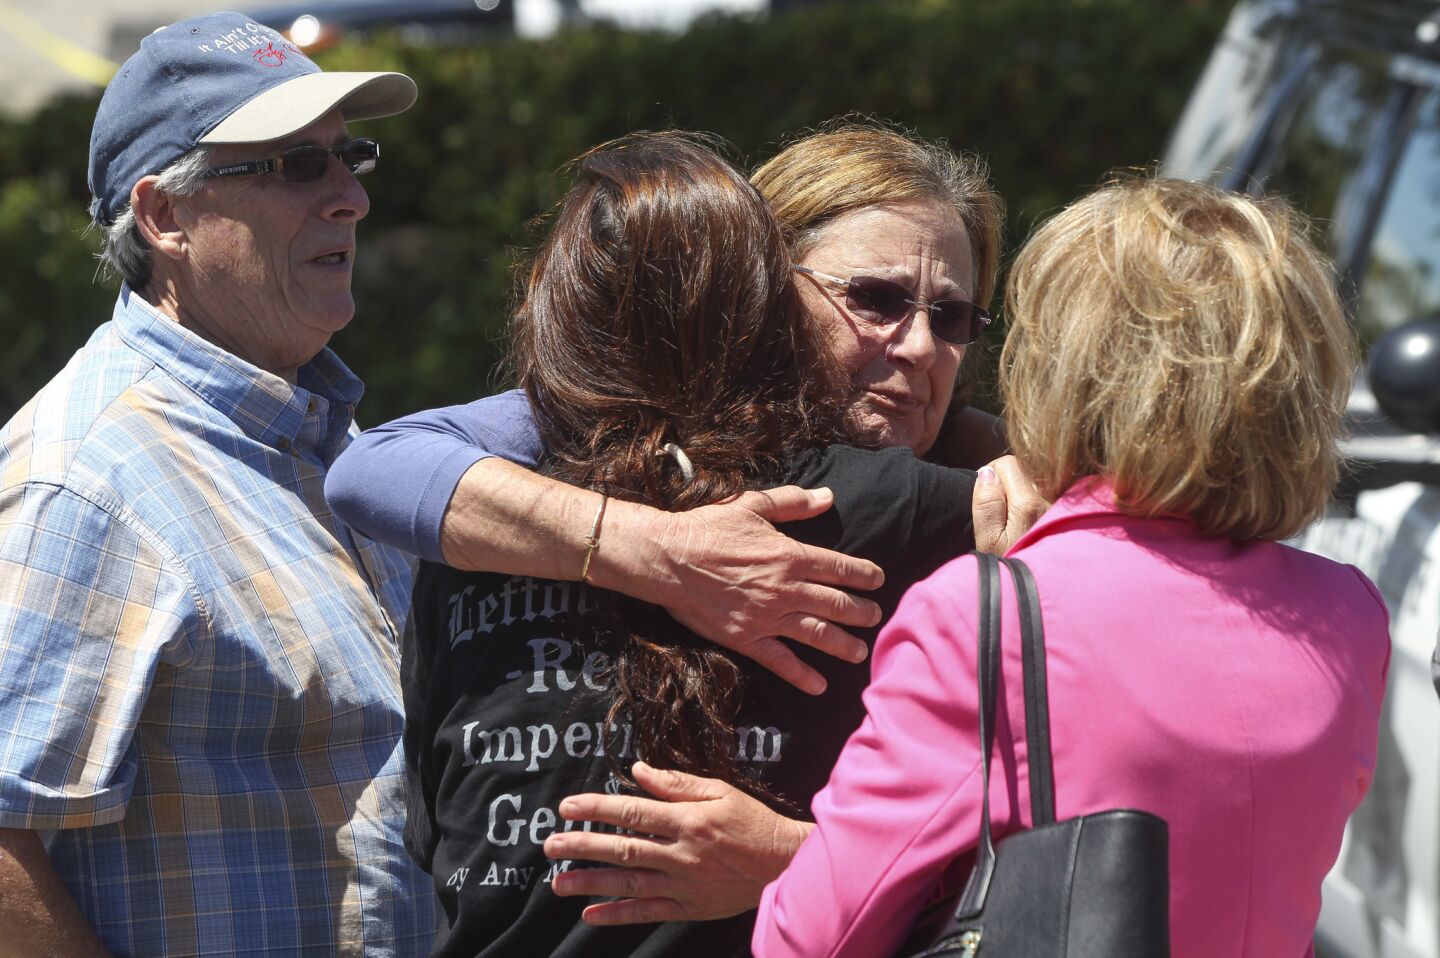 Chabad of Poway members gather outside their synagogue after a man shot multiple people on Saturday, killing one.